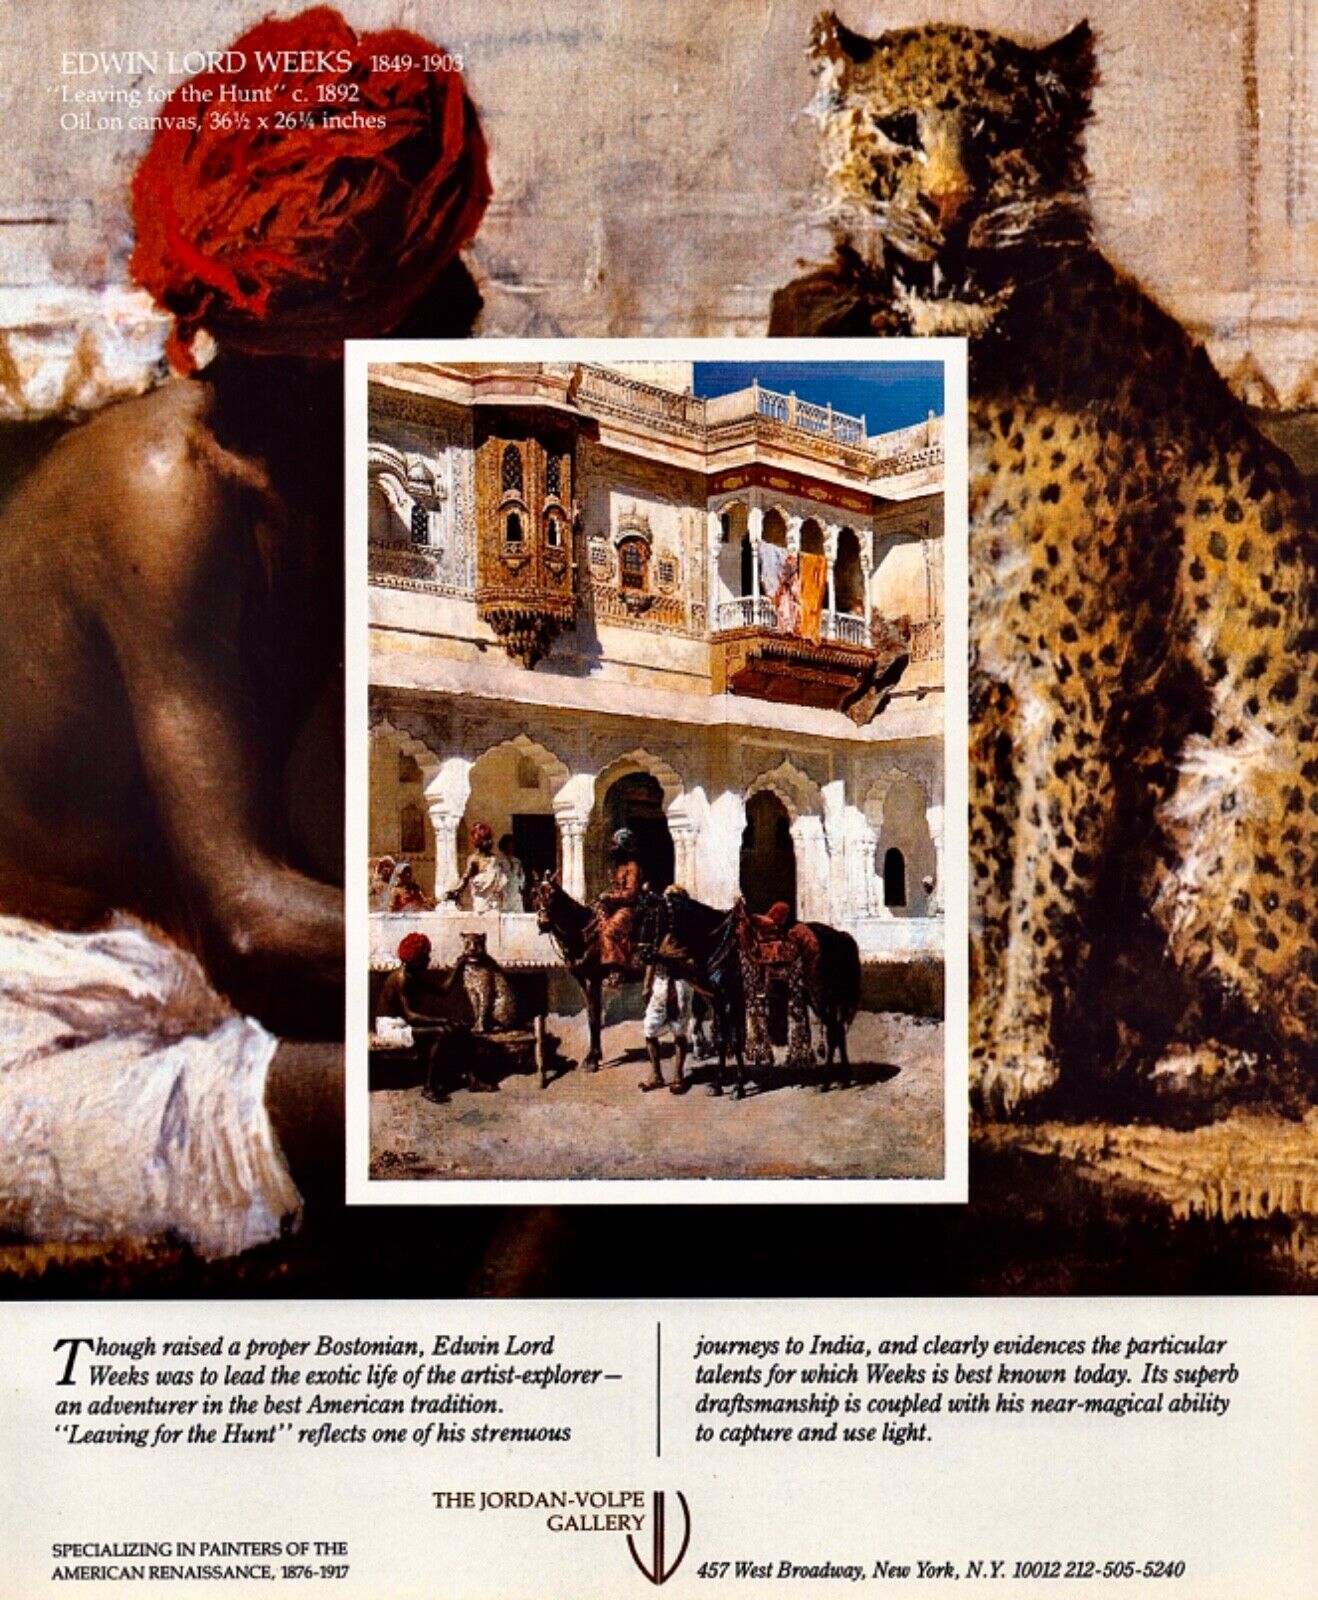 EDWIN LORD WEEKS Art Gallery Exhibit ~ Leaving for the Hunt ~ VTG PRINT AD 1984